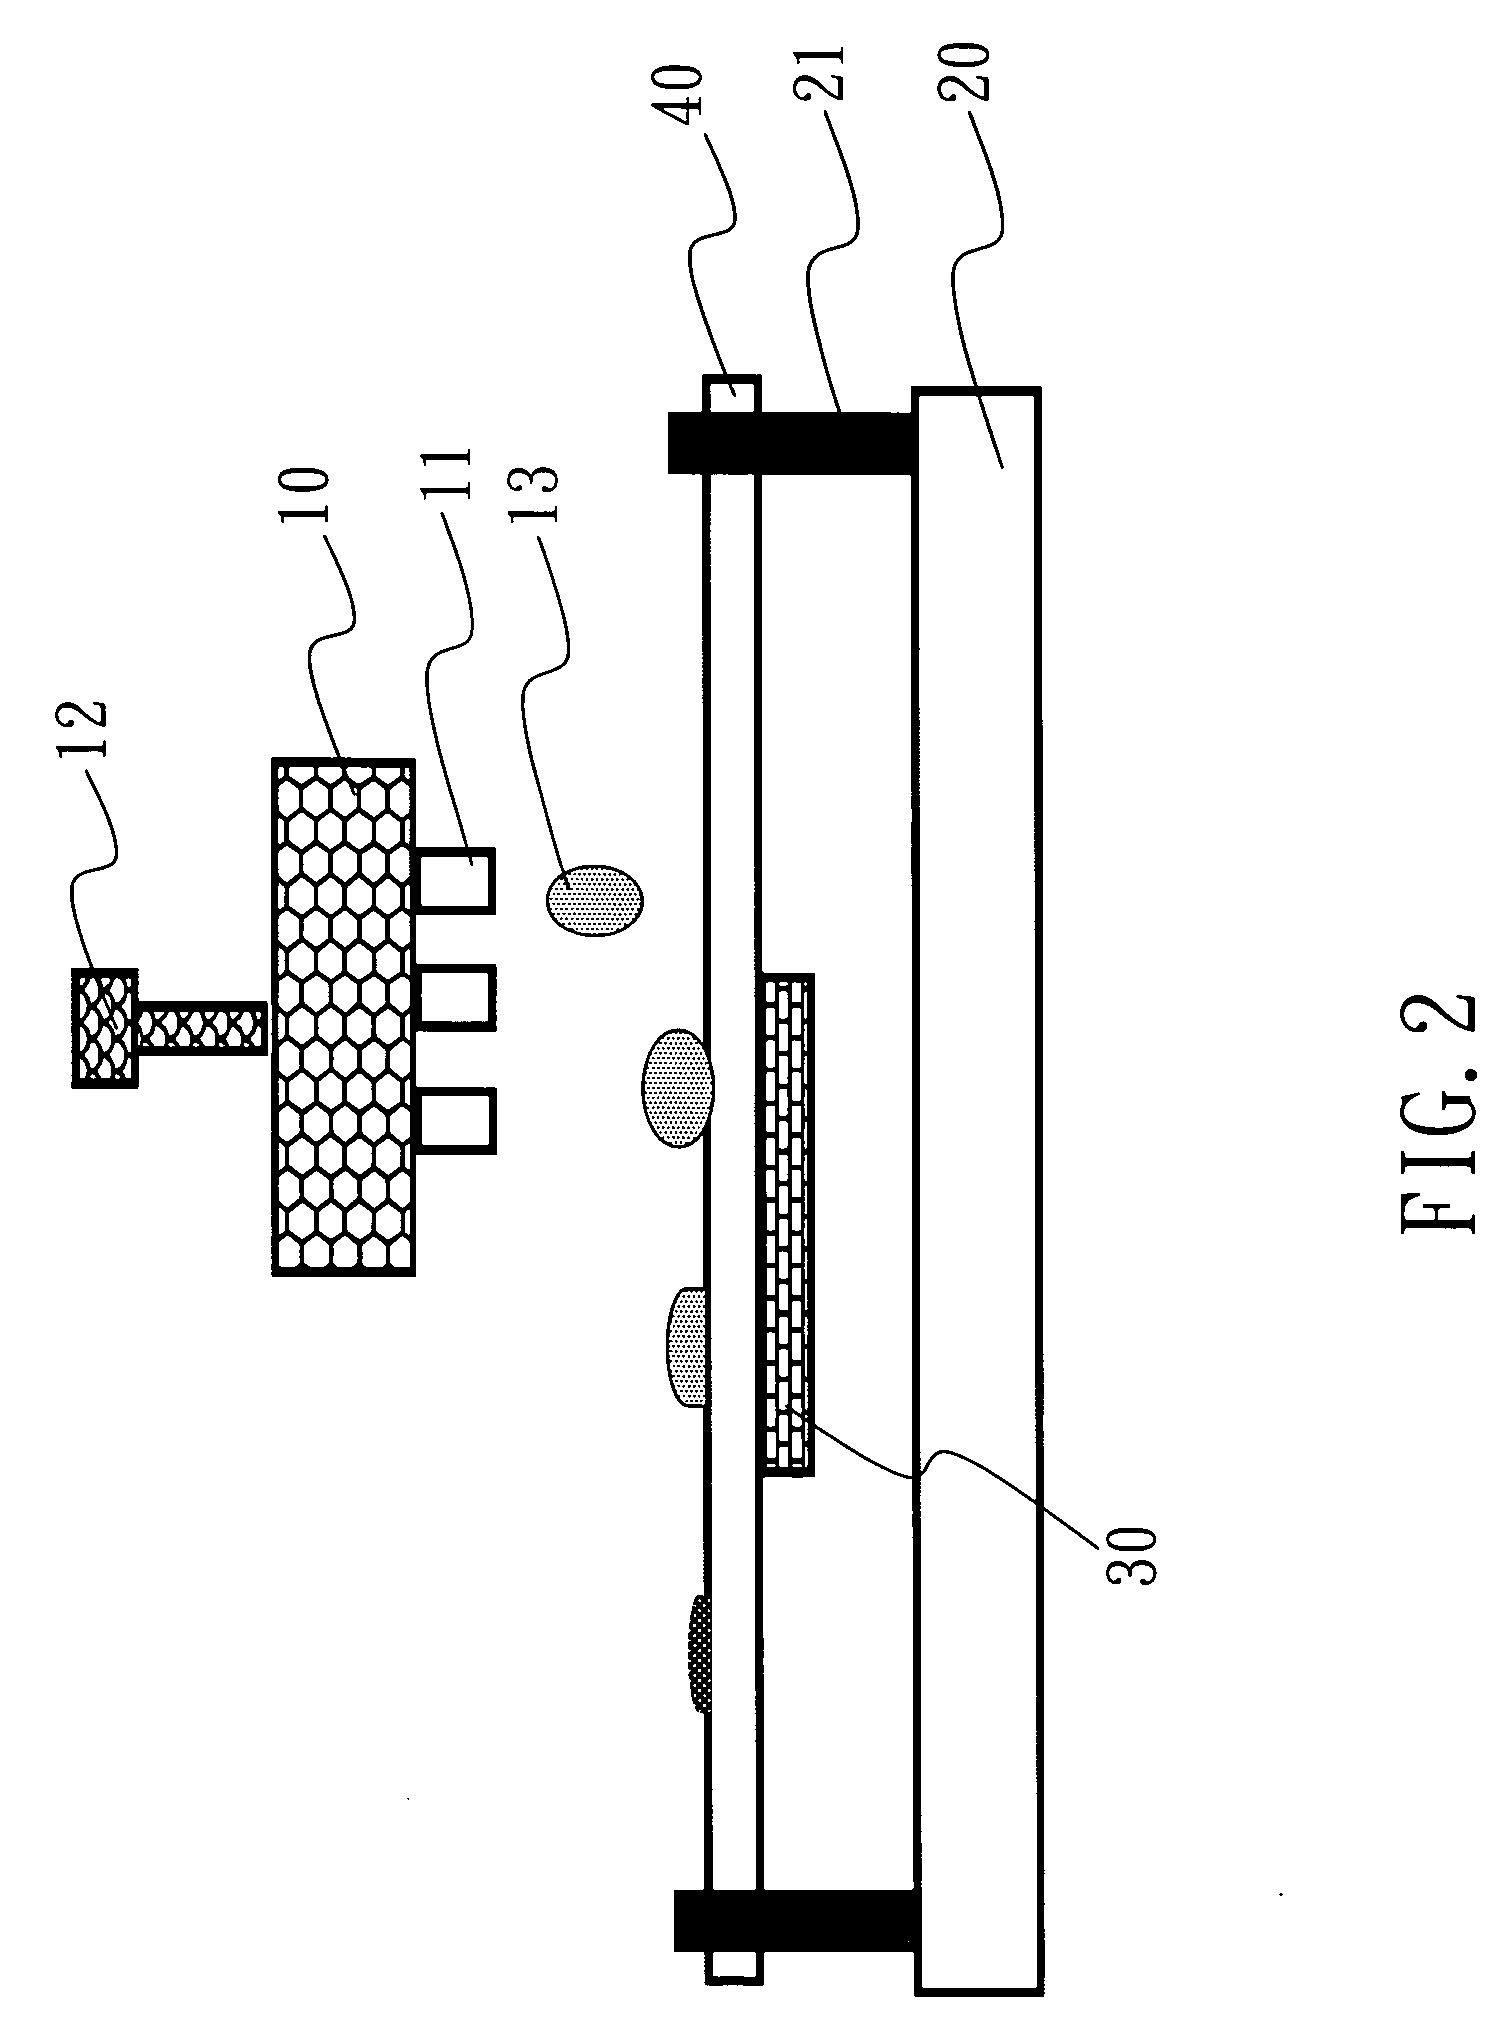 Method for forming metal wires by microdispensing pattern